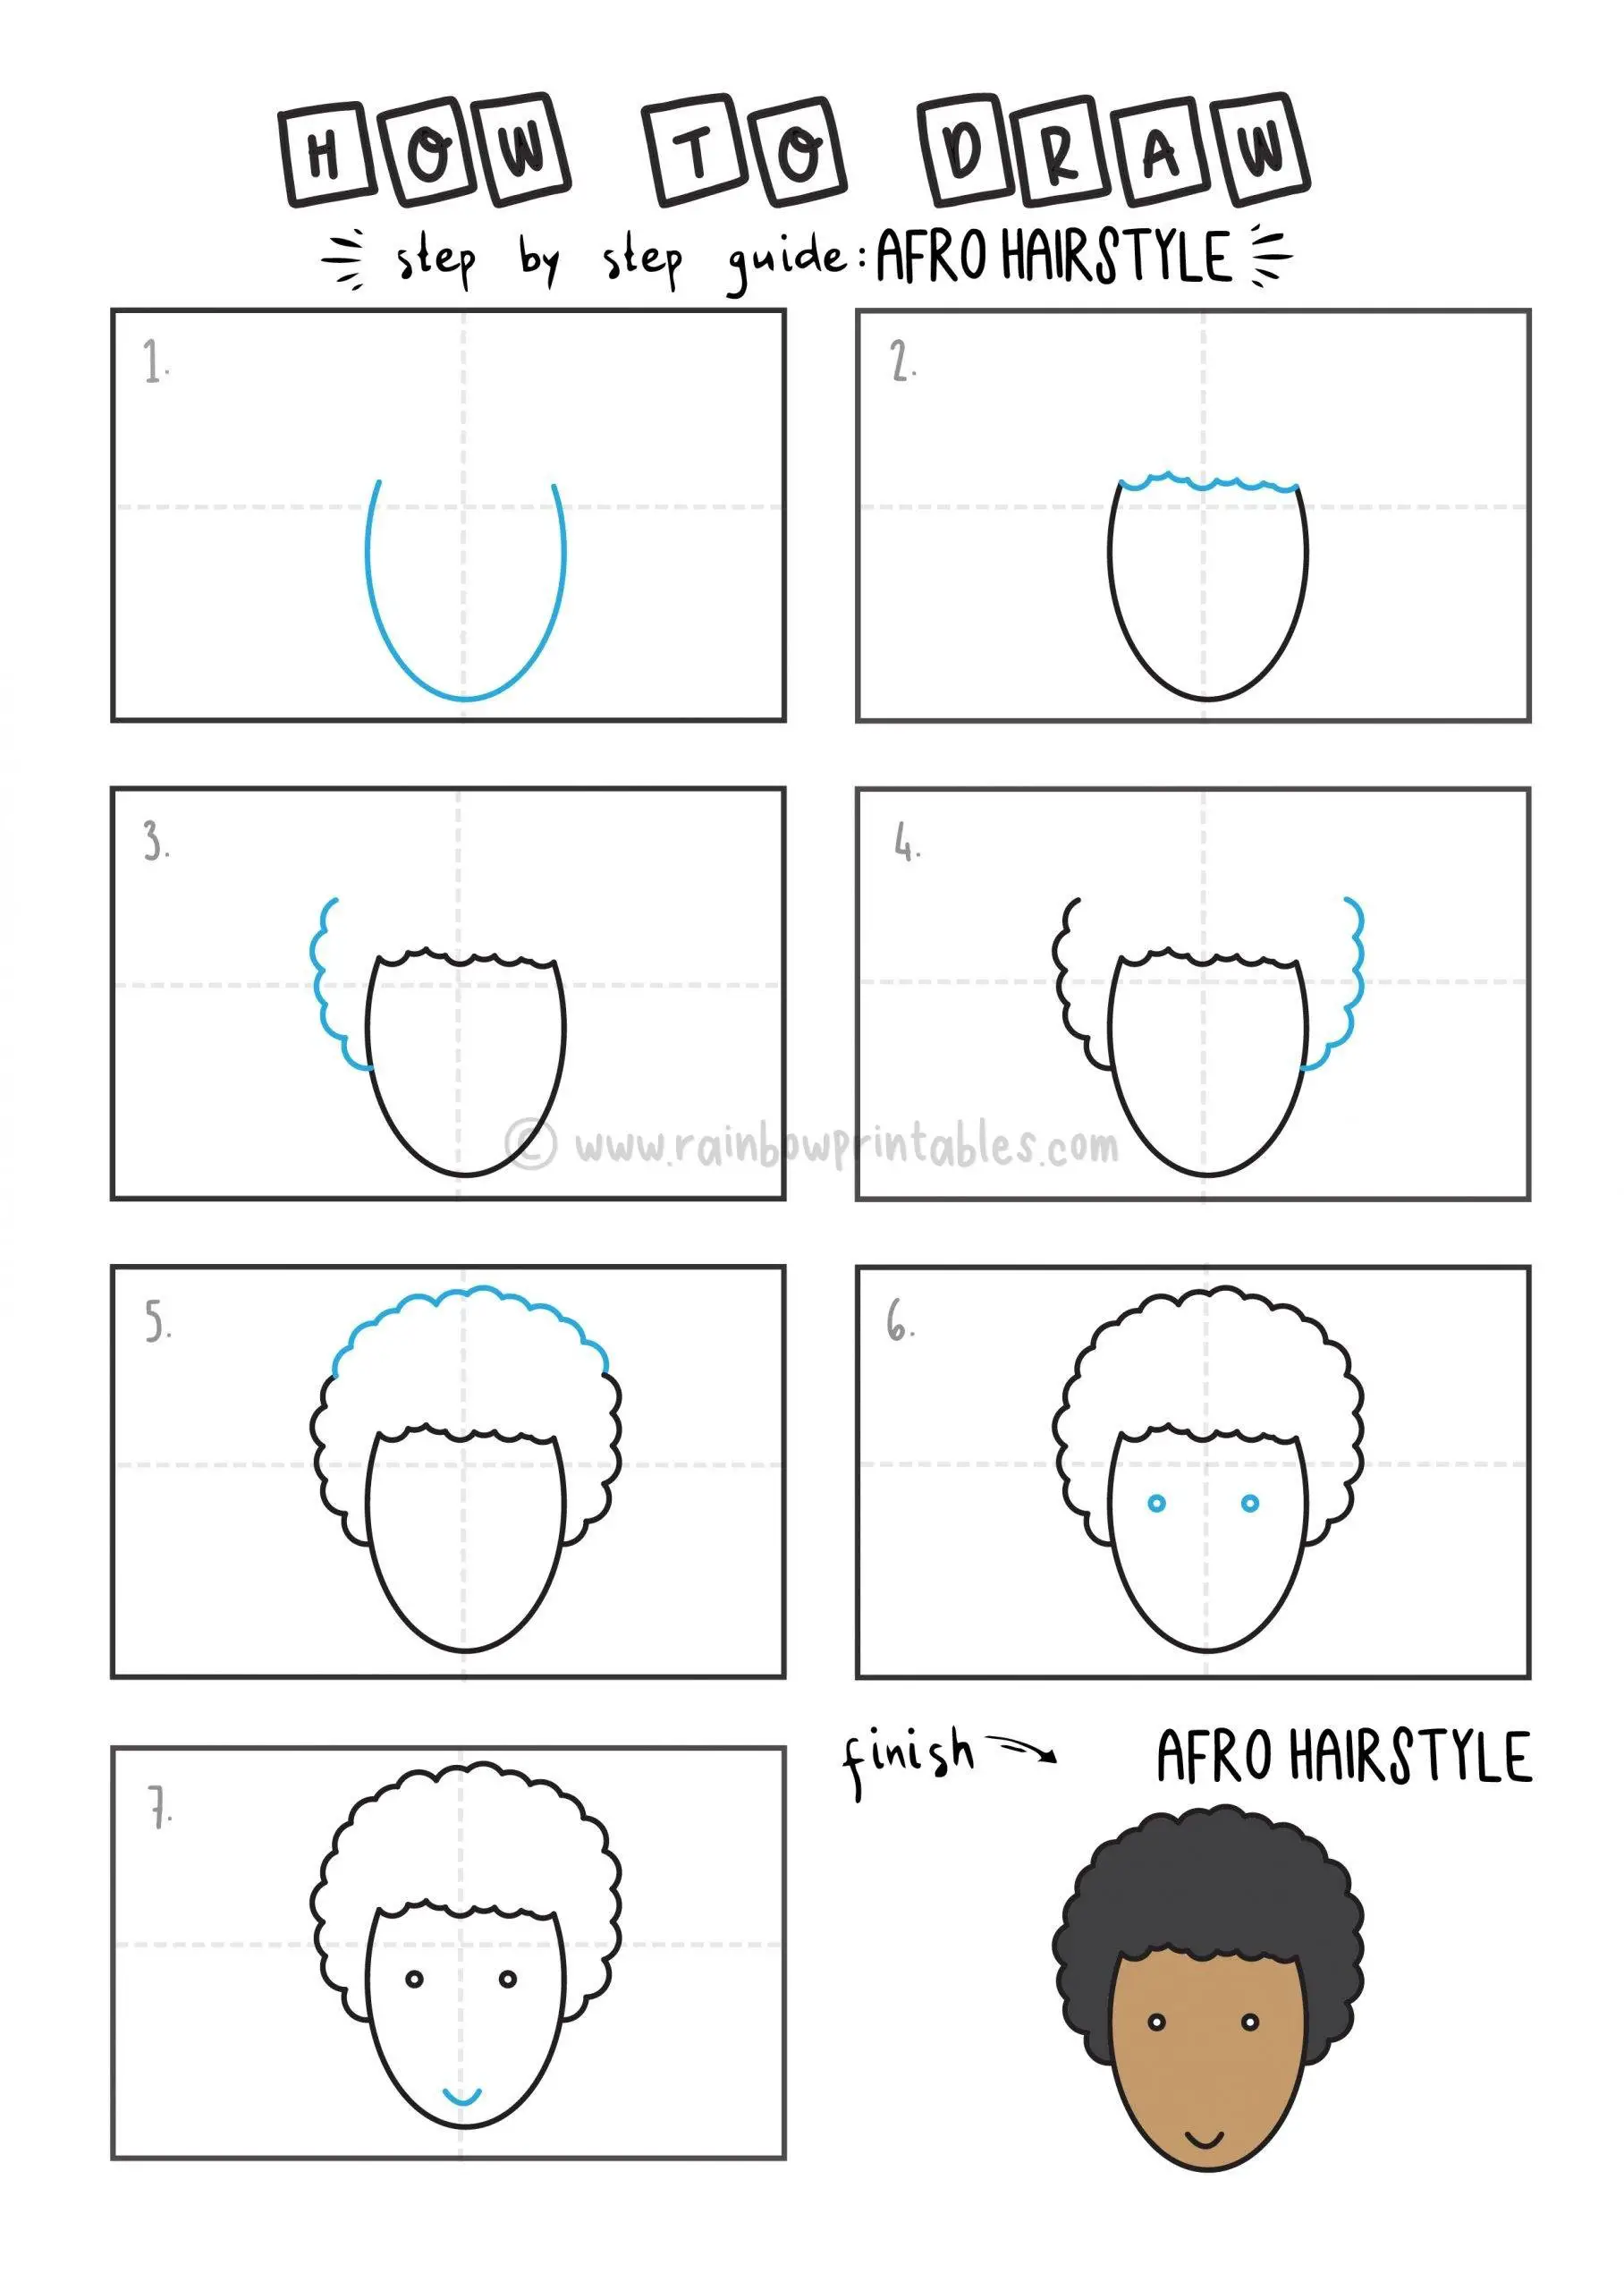 How To Draw an Afro hairStyle arts tutorial step by step for kids